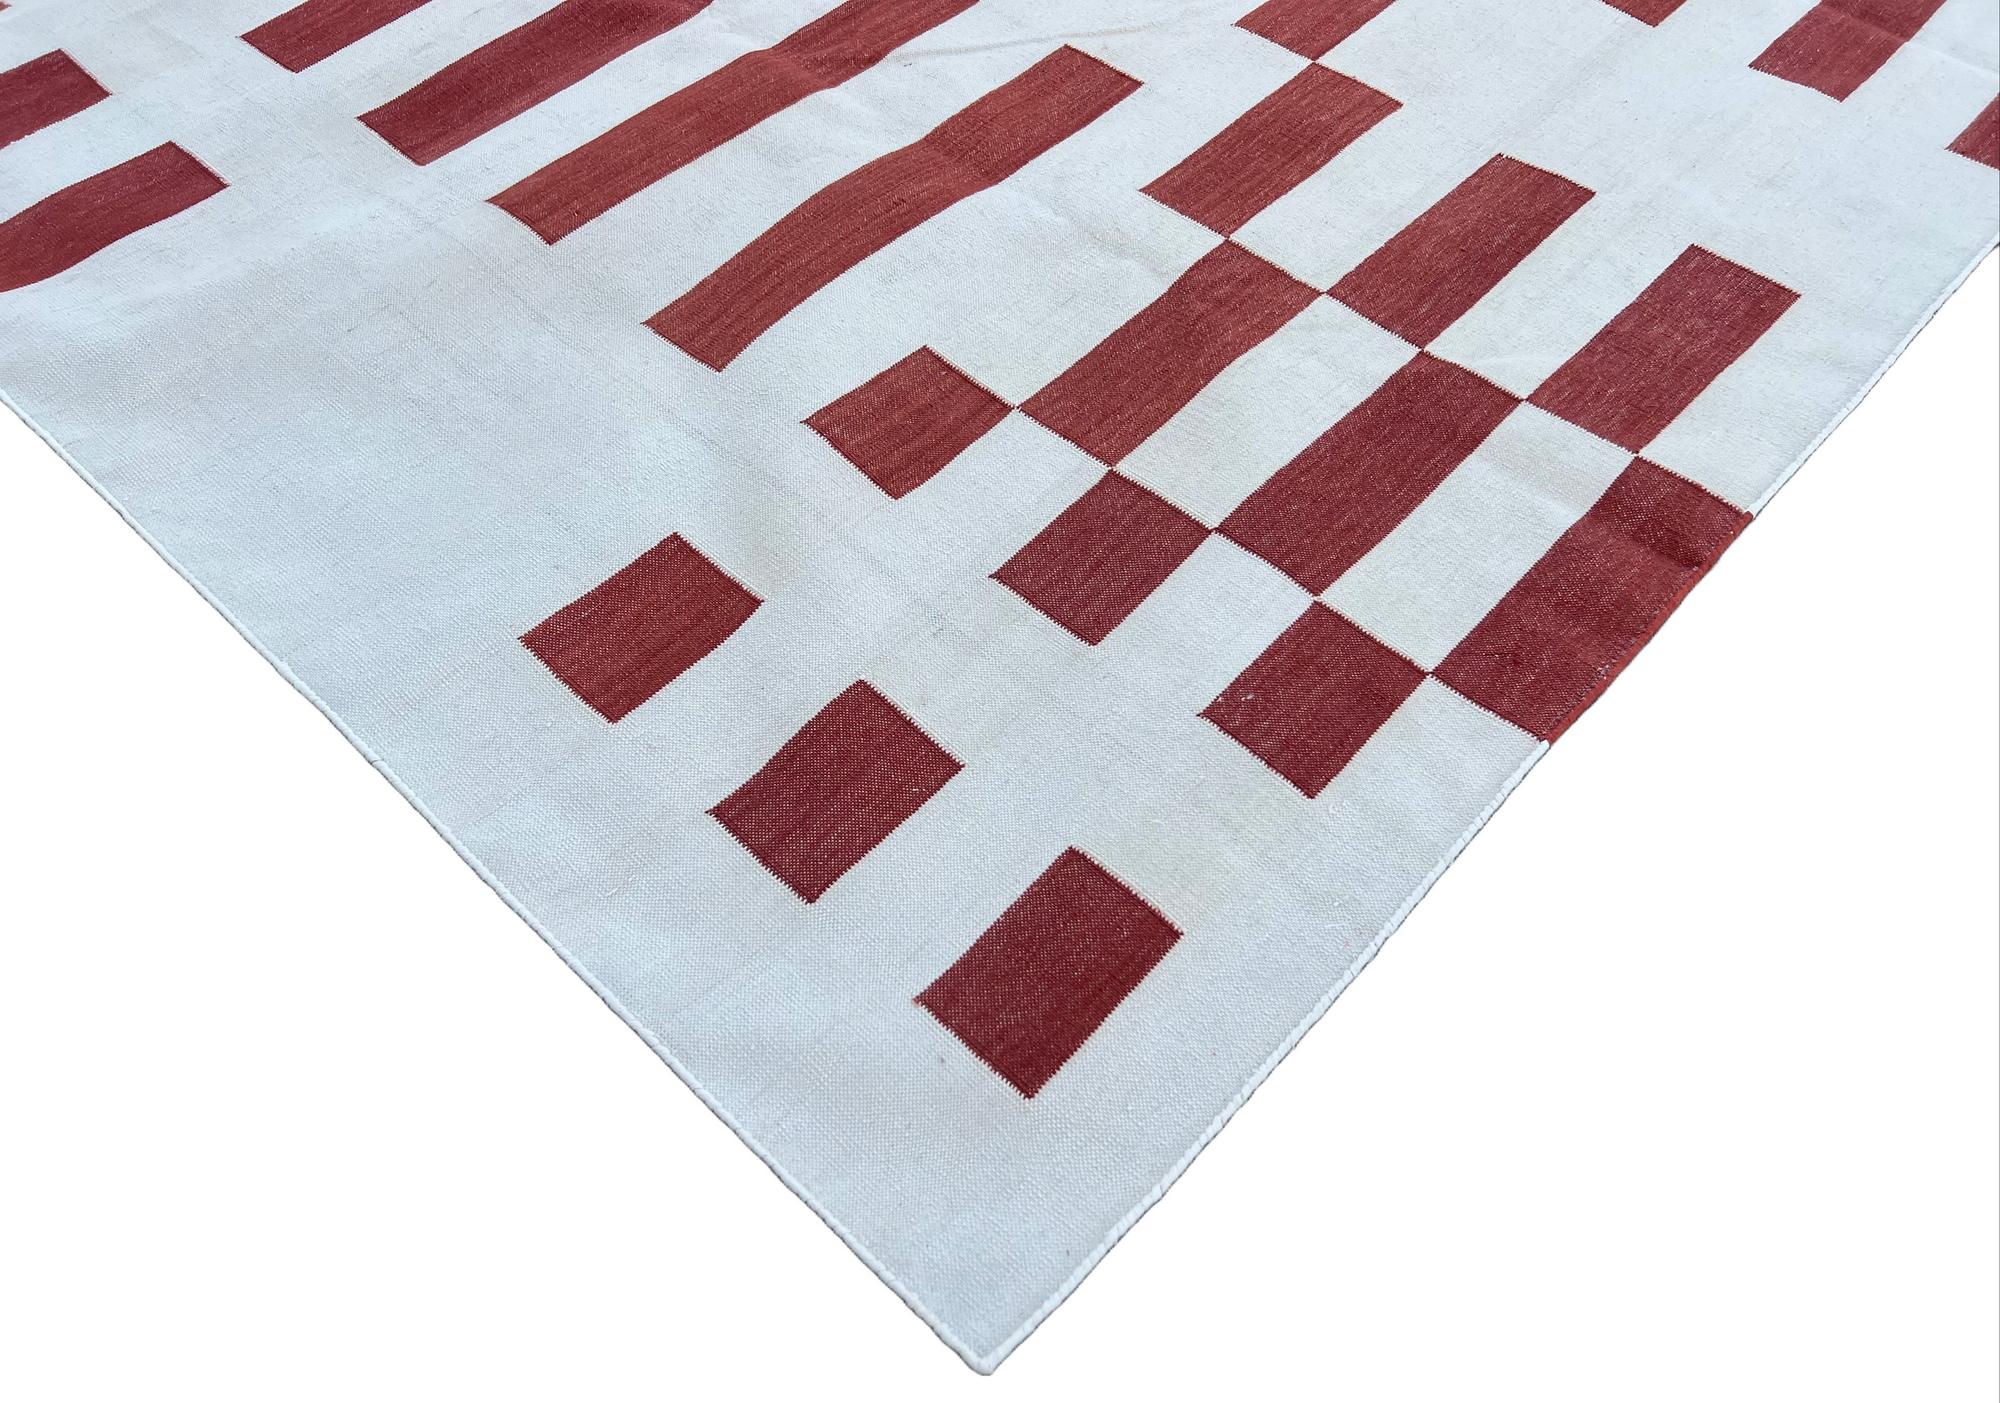 Hand-Woven Handmade Cotton Area Flat Weave Rug, 8x10 Red And White Striped Indian Dhurrie For Sale